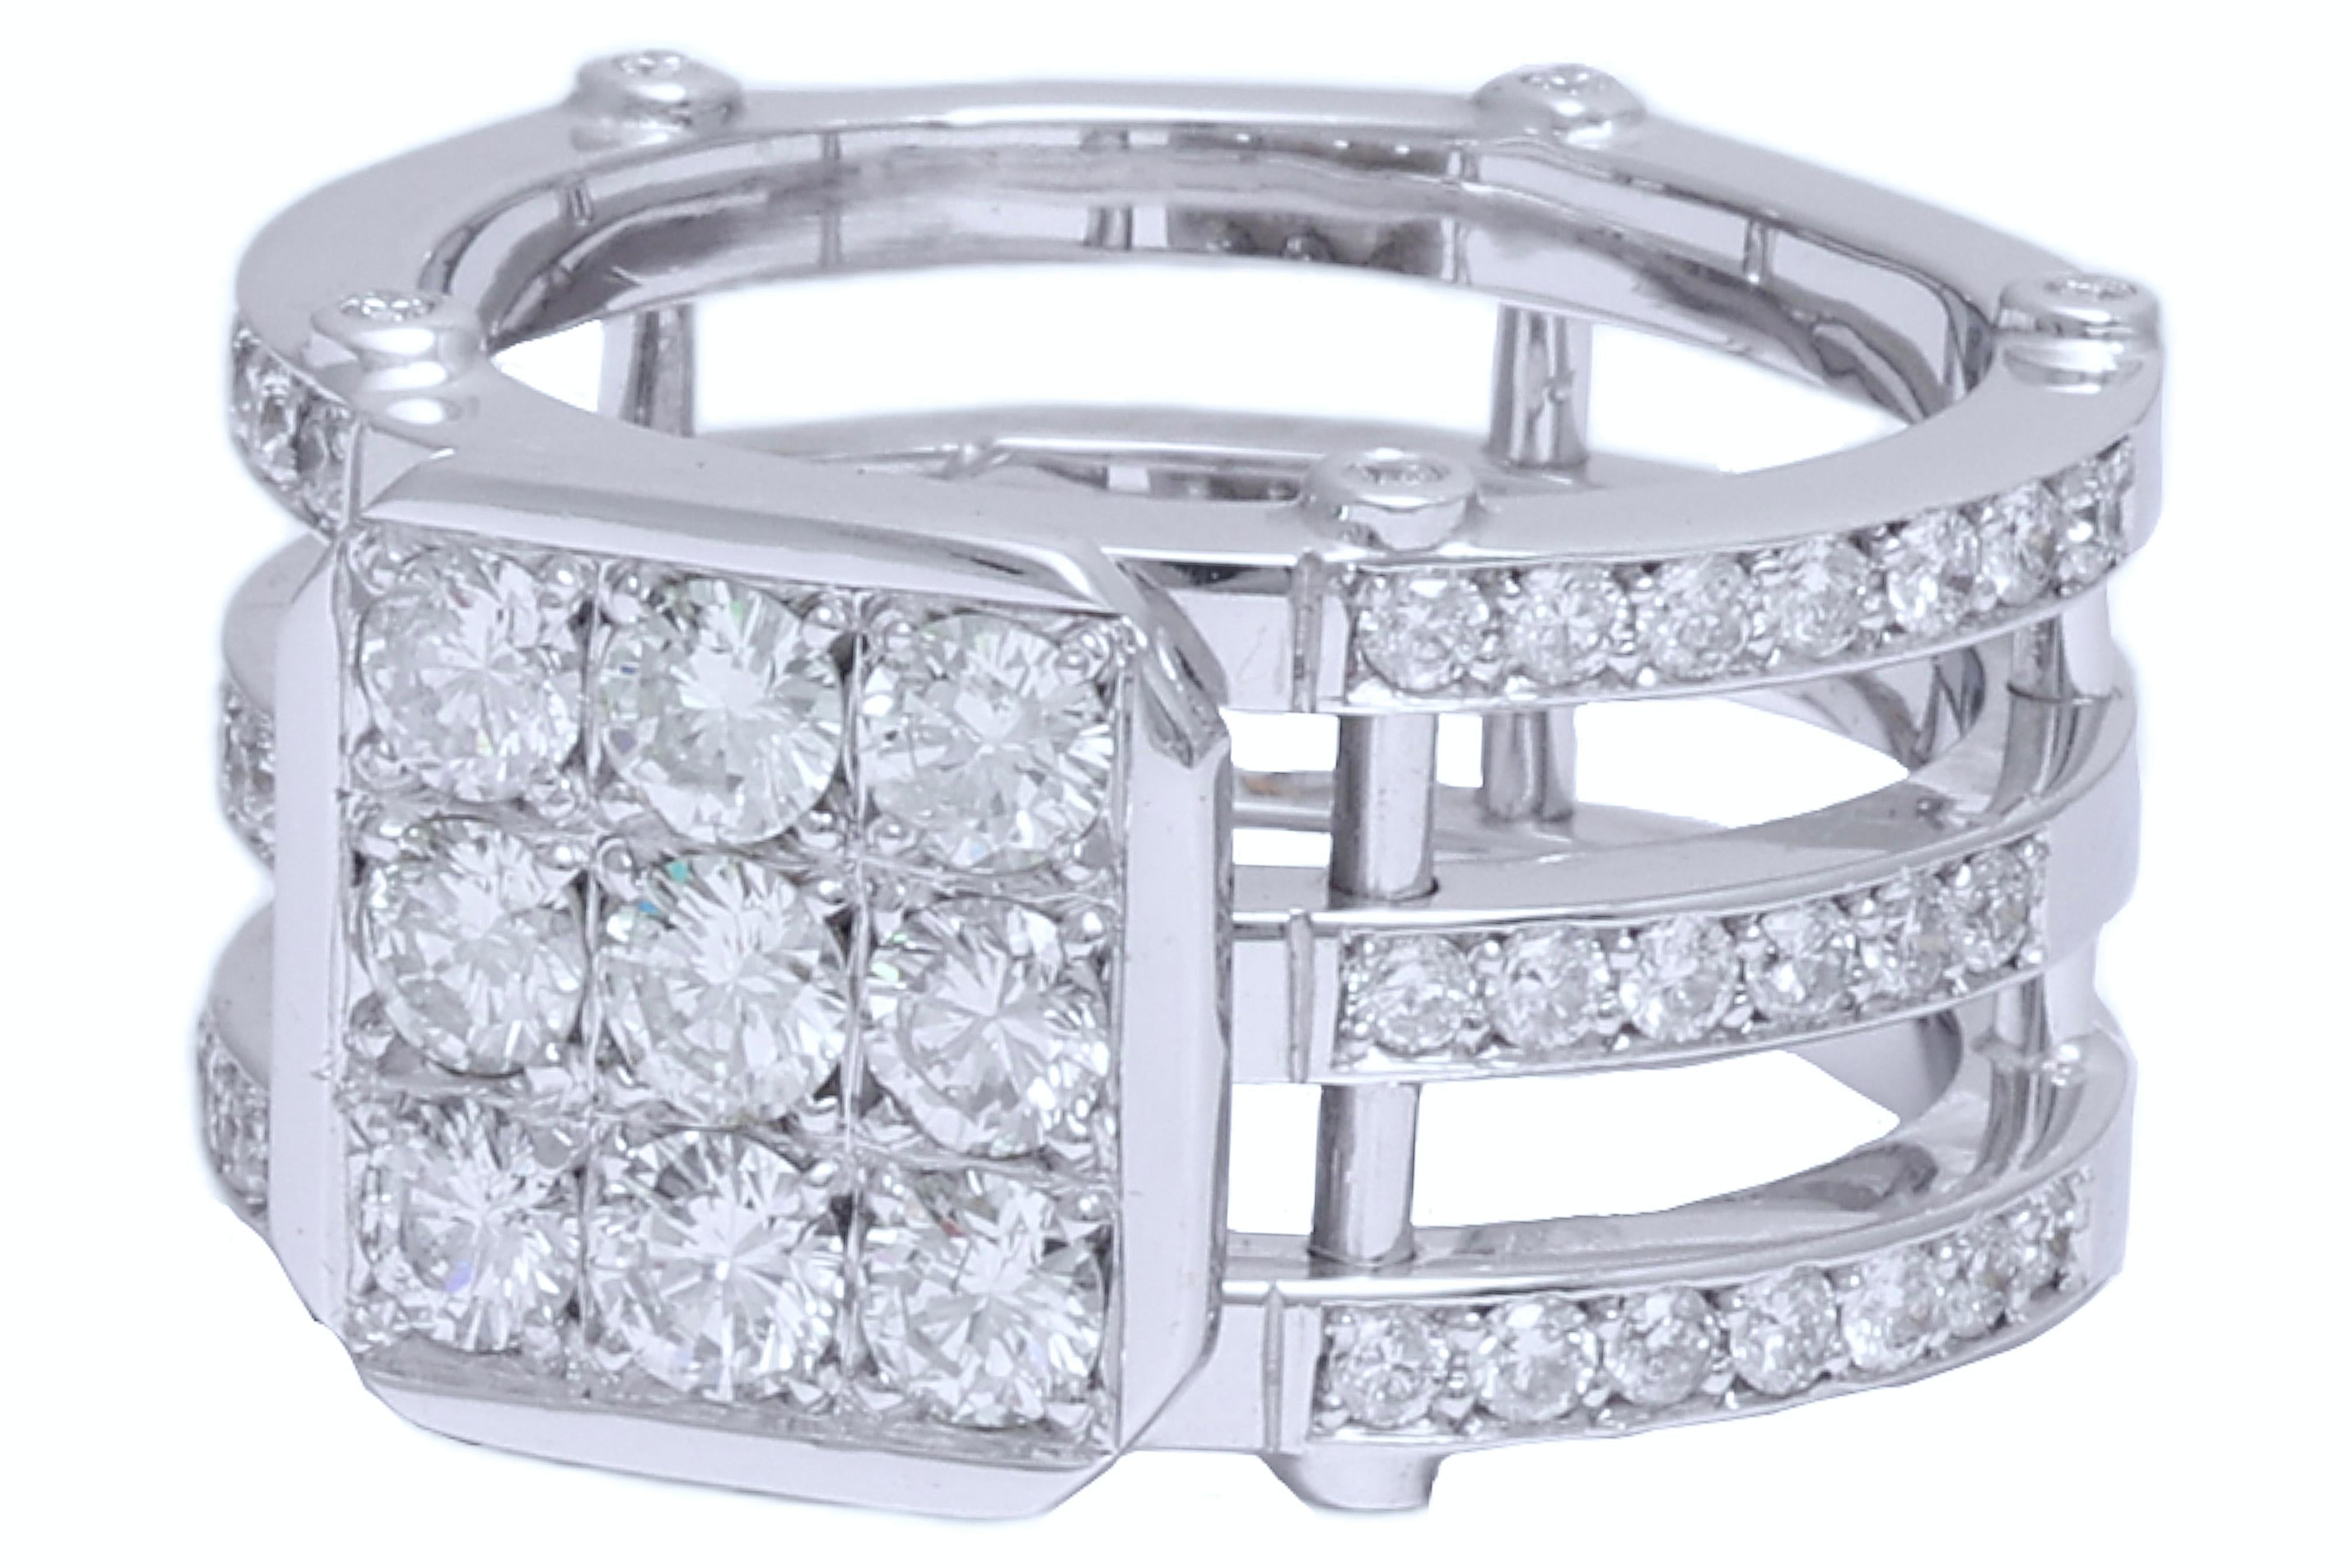 Gorgeous 18 kt. White Gold Ring With 2.29 ct. Brilliant Cut Diamonds

Diamonds: Brilliant cut diamonds, together approx. 2.29 ct.

Material: 18 kt. white gold

Ring size: 62 EU / 10 US ( can be resized)

Total weight: 18 grams / 11.6 dwt / 0.635 oz